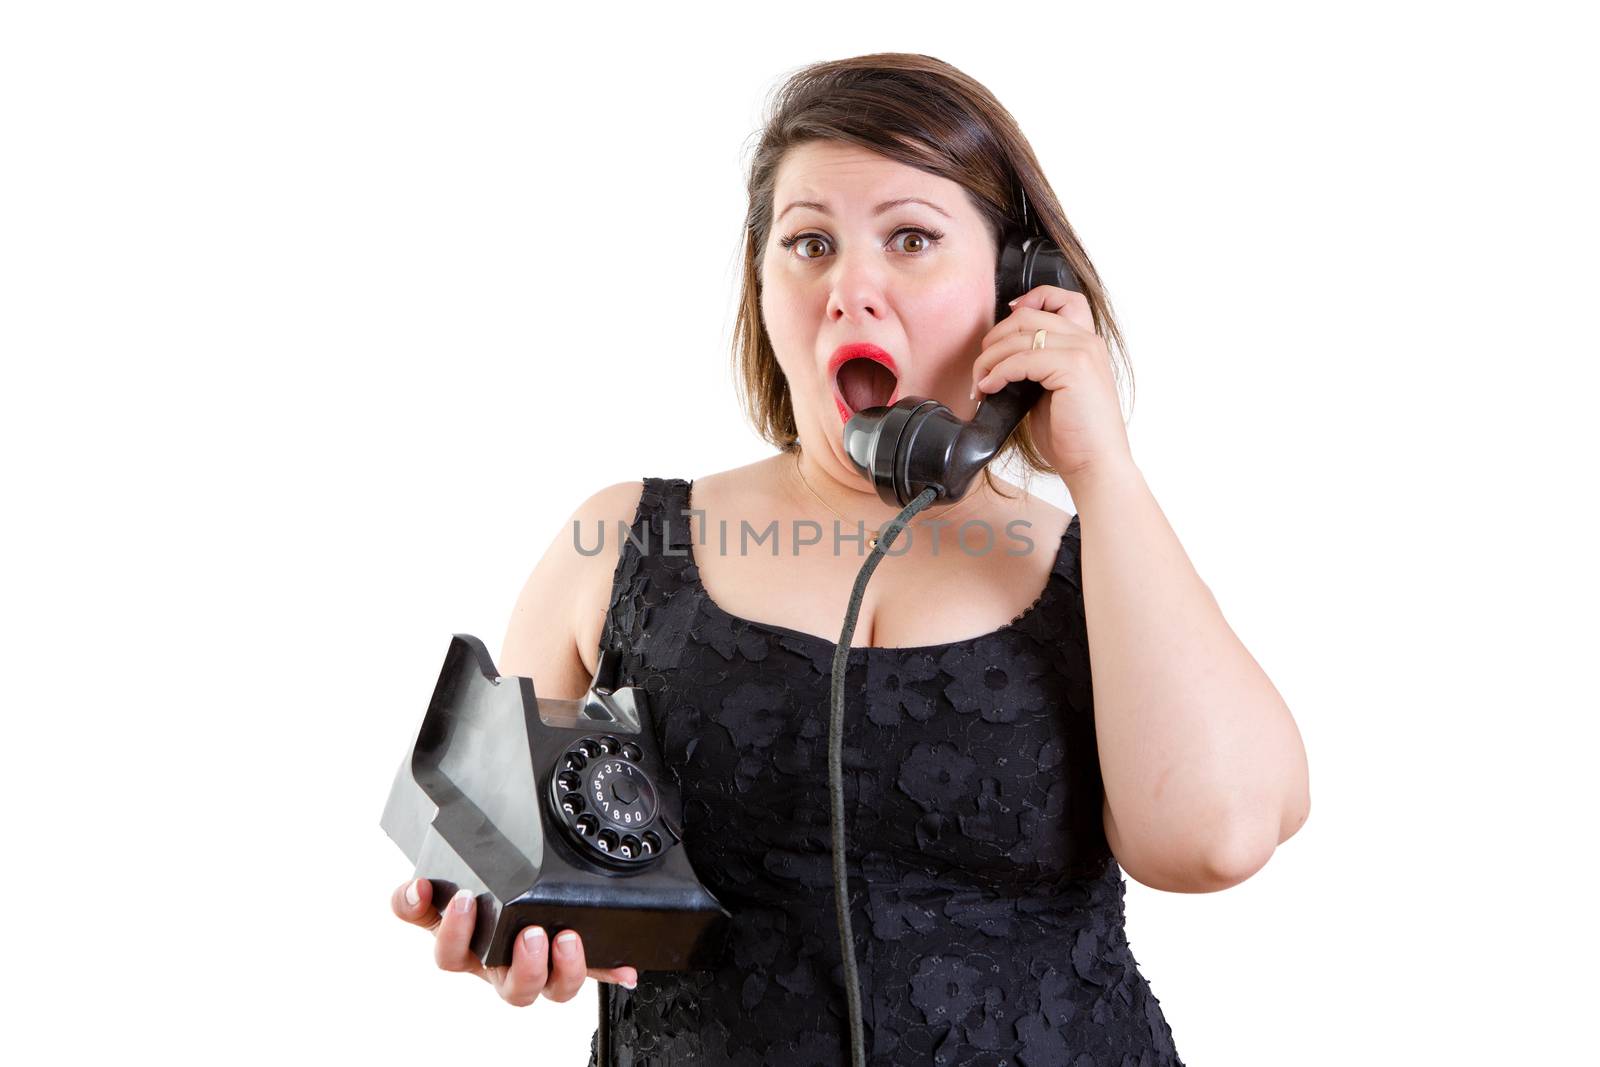 Astonished woman talking on an old fashioned rotary telephone reacting to surprising news in a communications concept on white